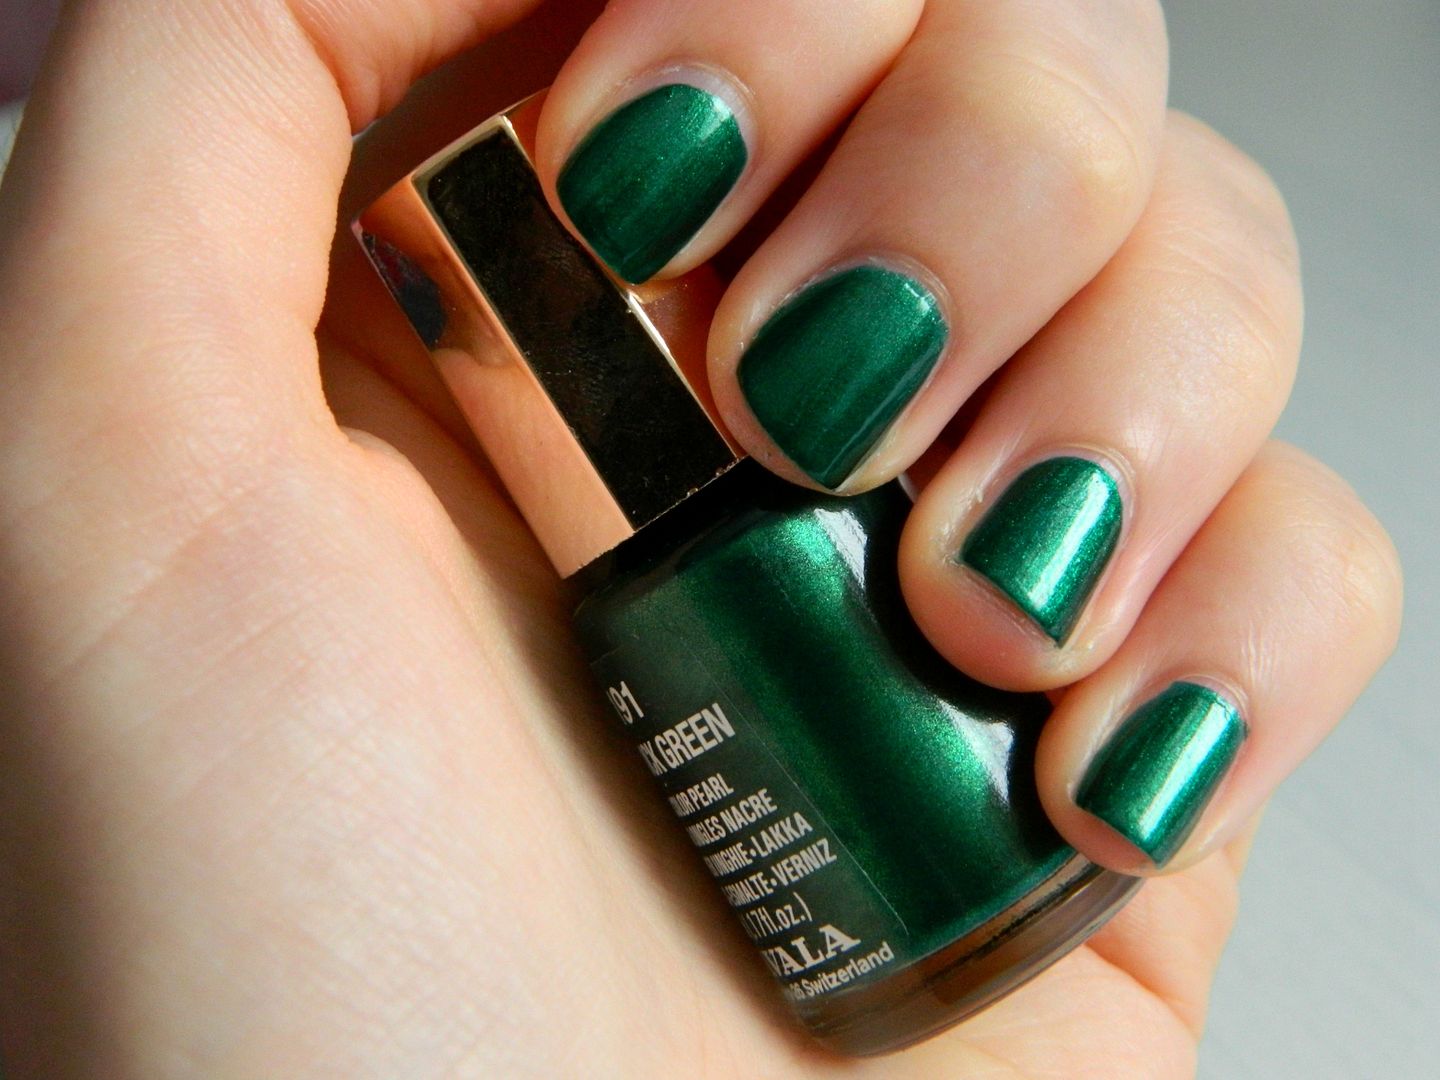 Mavala Nail Polish Peacock Green Swatch Review Belle-amie